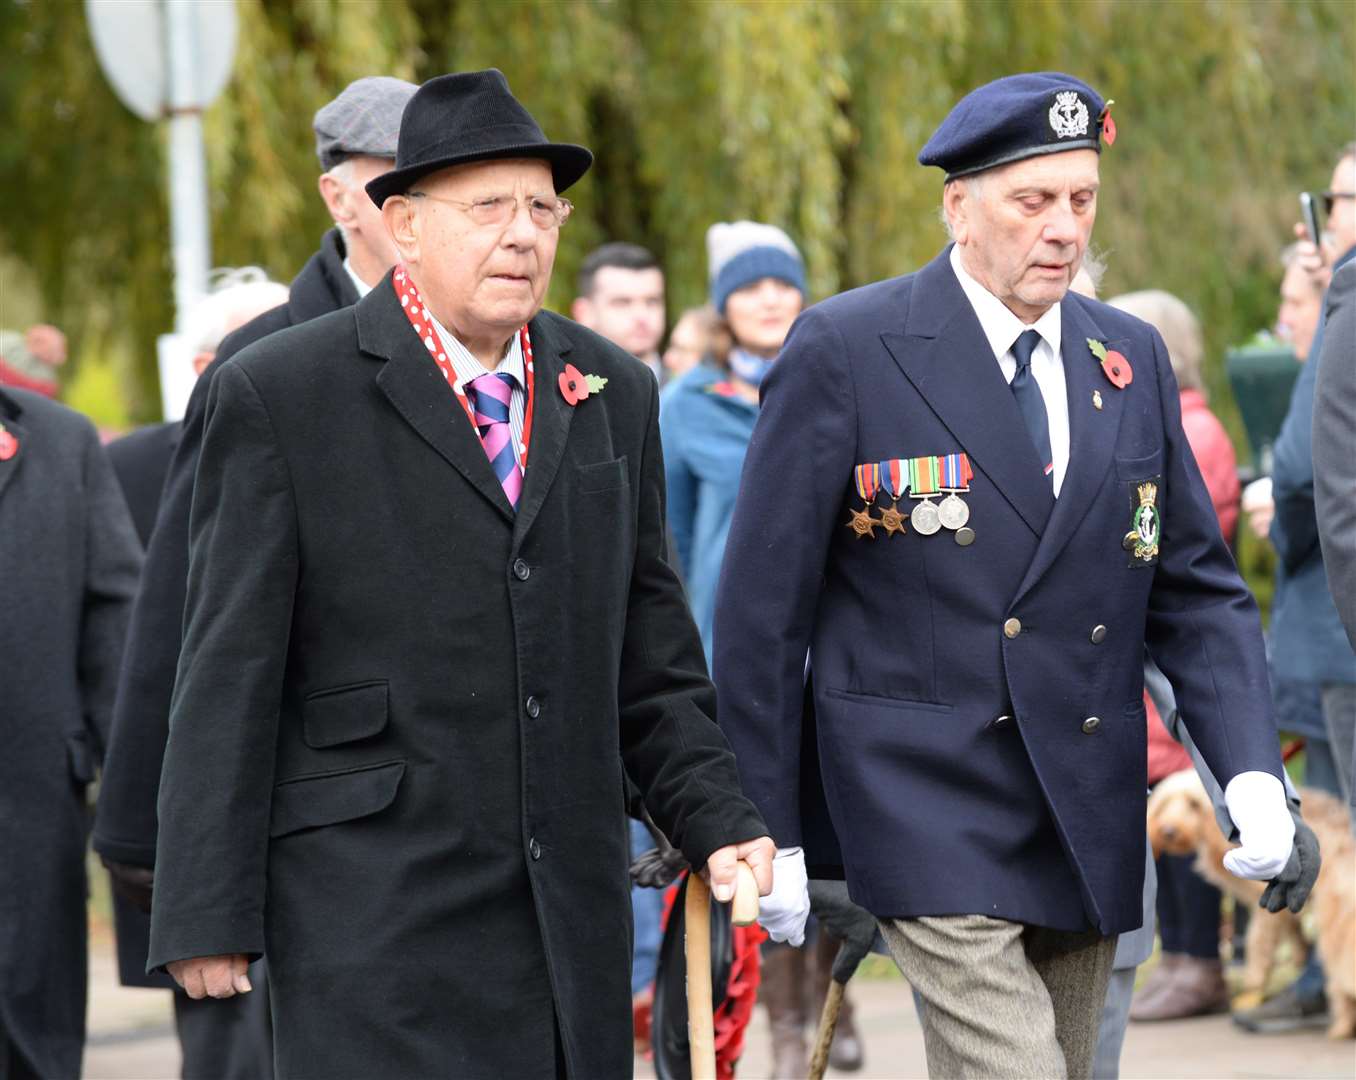 Most know Royal British Legion member s at parades but a social group is set to shut